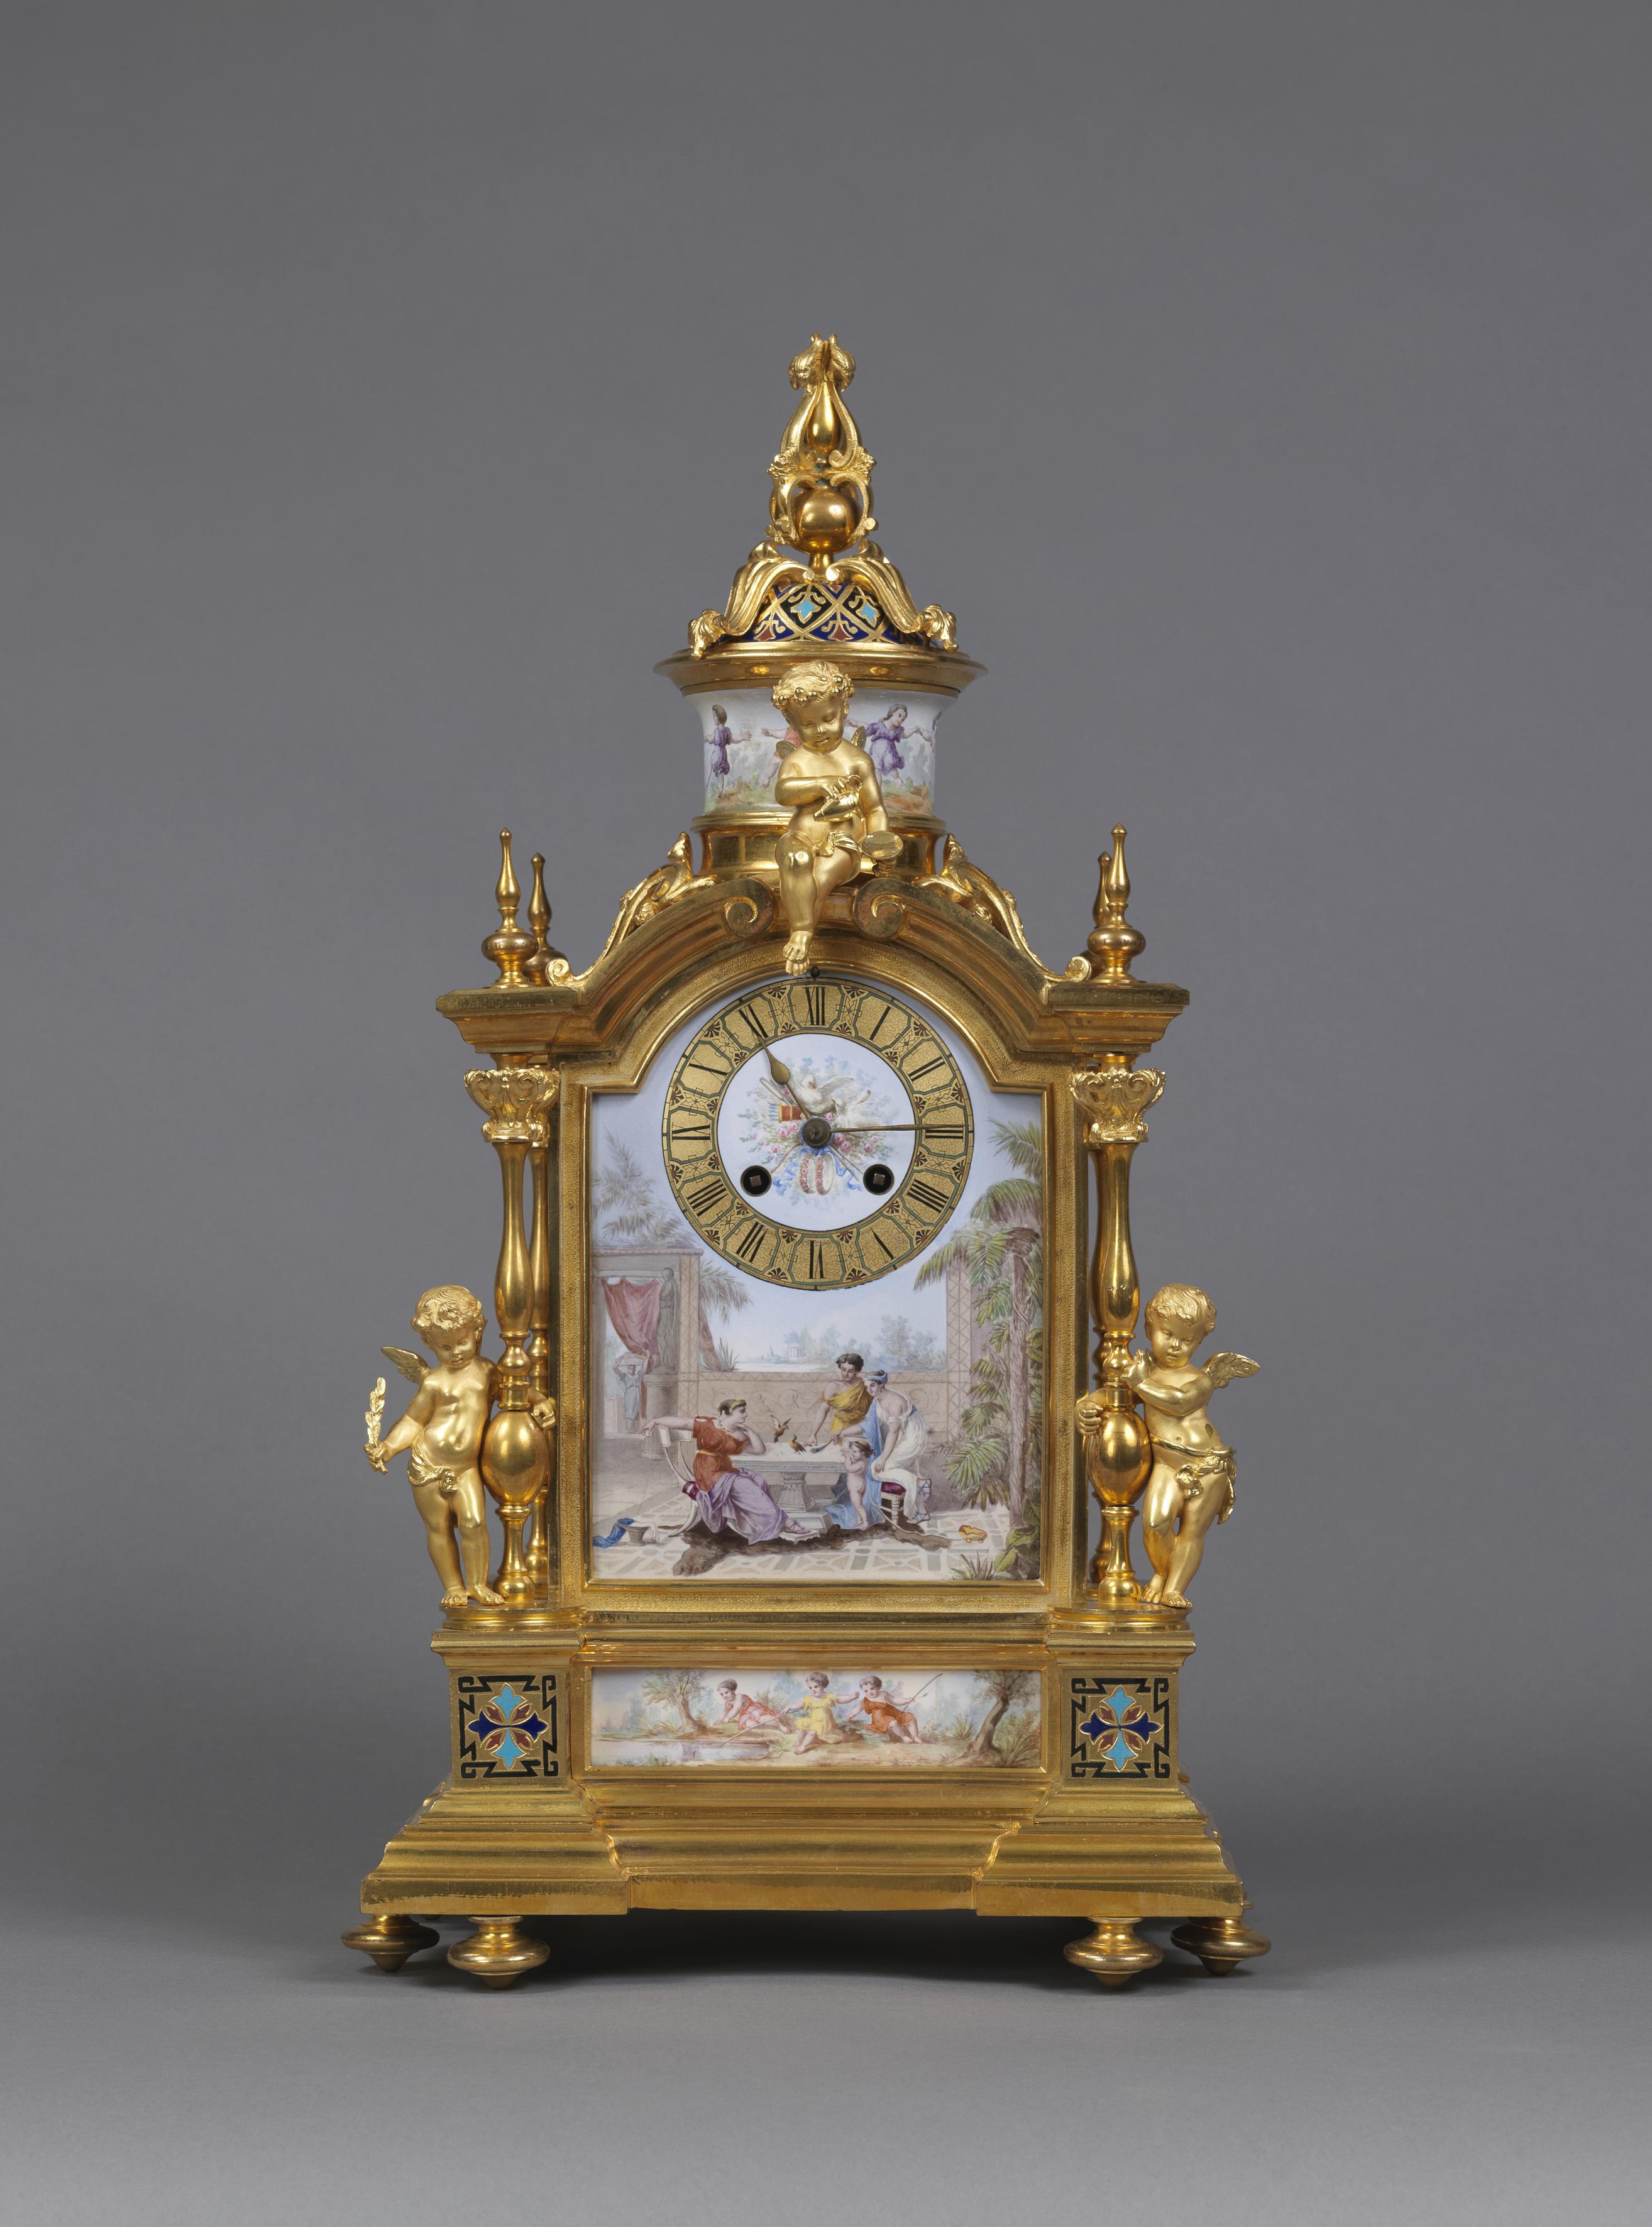 An exceptional Louis XVI style champlevé enamel and gilt-bronze mantel clock with finely painted neoclassical scenes by Leroy & Fils.

French, circa 1880. 

Stamped to the movement ‘LEROY & FILS A PARIS, 823’.

This fine gilt-bronze and